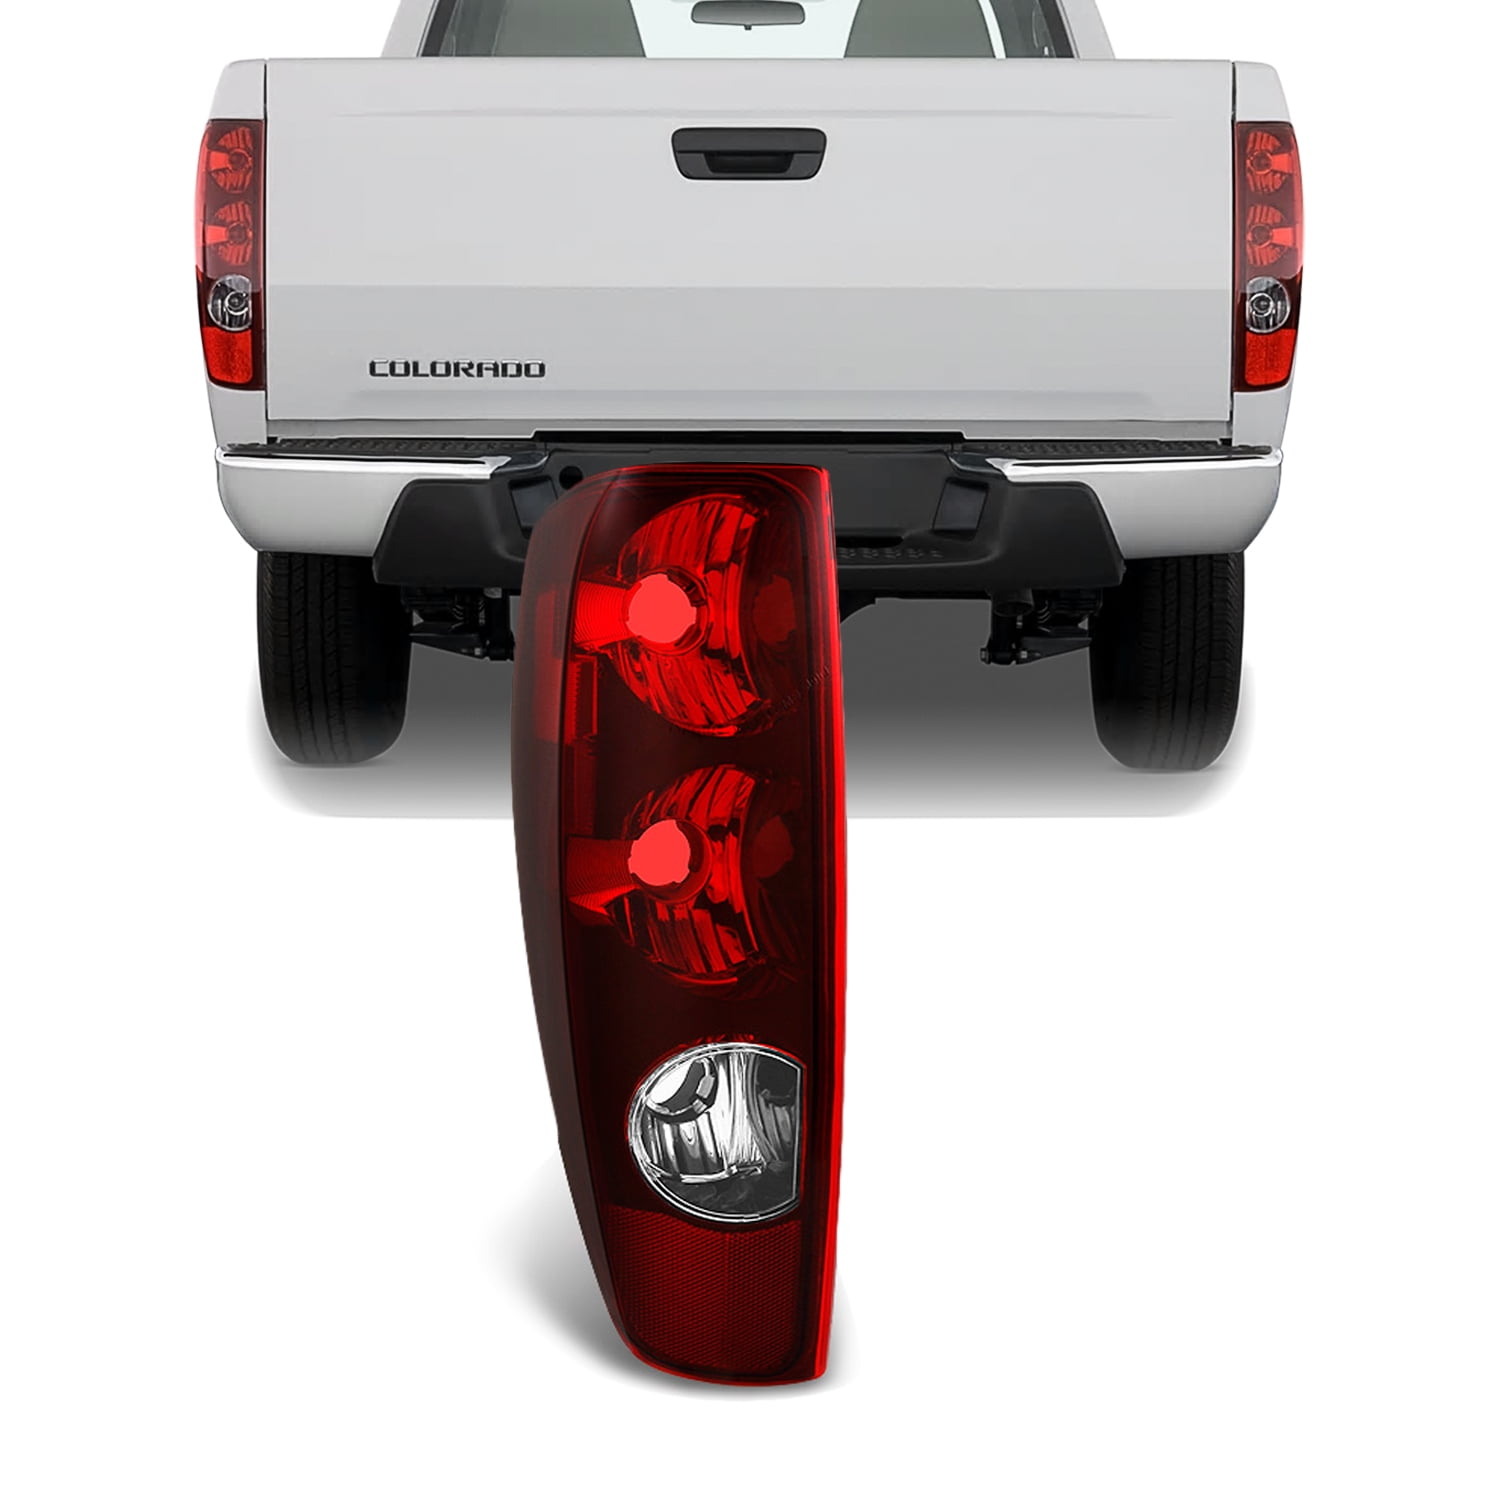 Fit 04-12 Chevy Colorado /GMC Canyon Red Tail Lights L+R Replacement